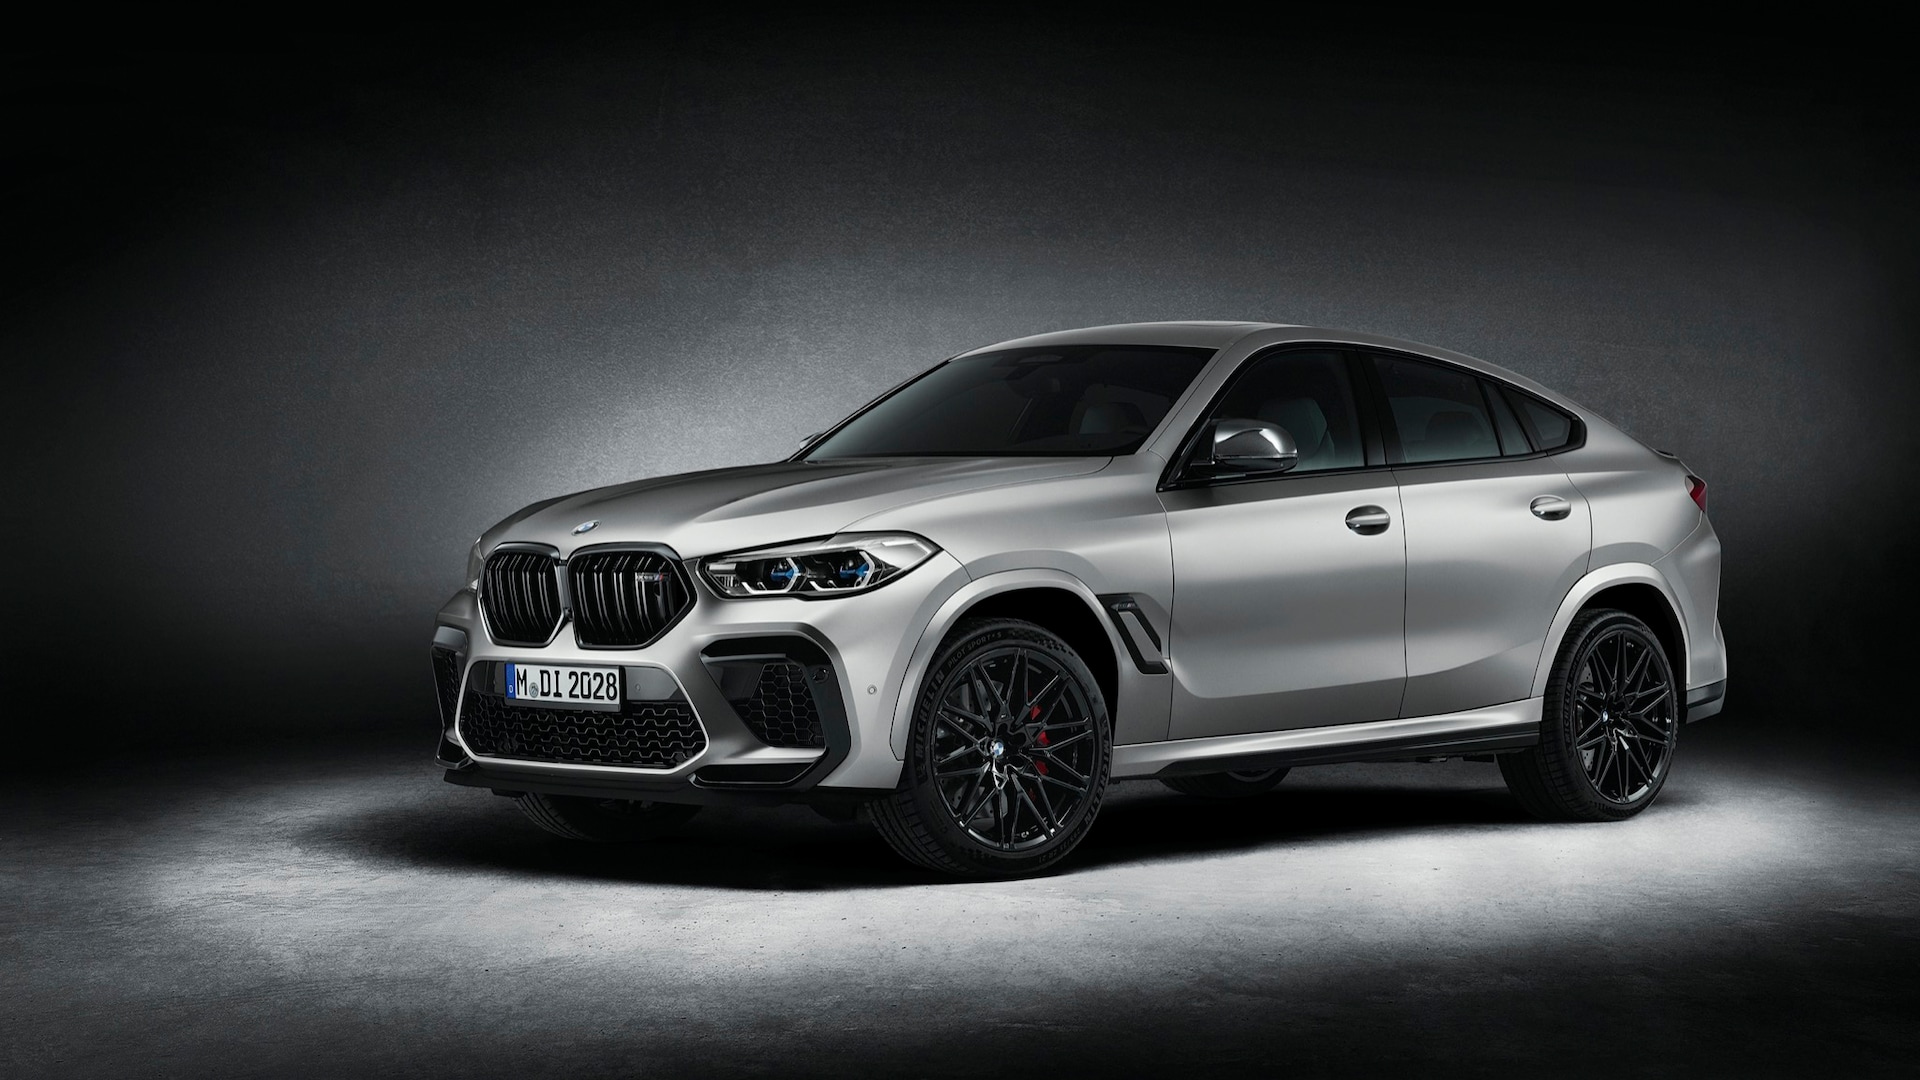 The BMW X5 M and X6 M Get Sleek and Special First Editions